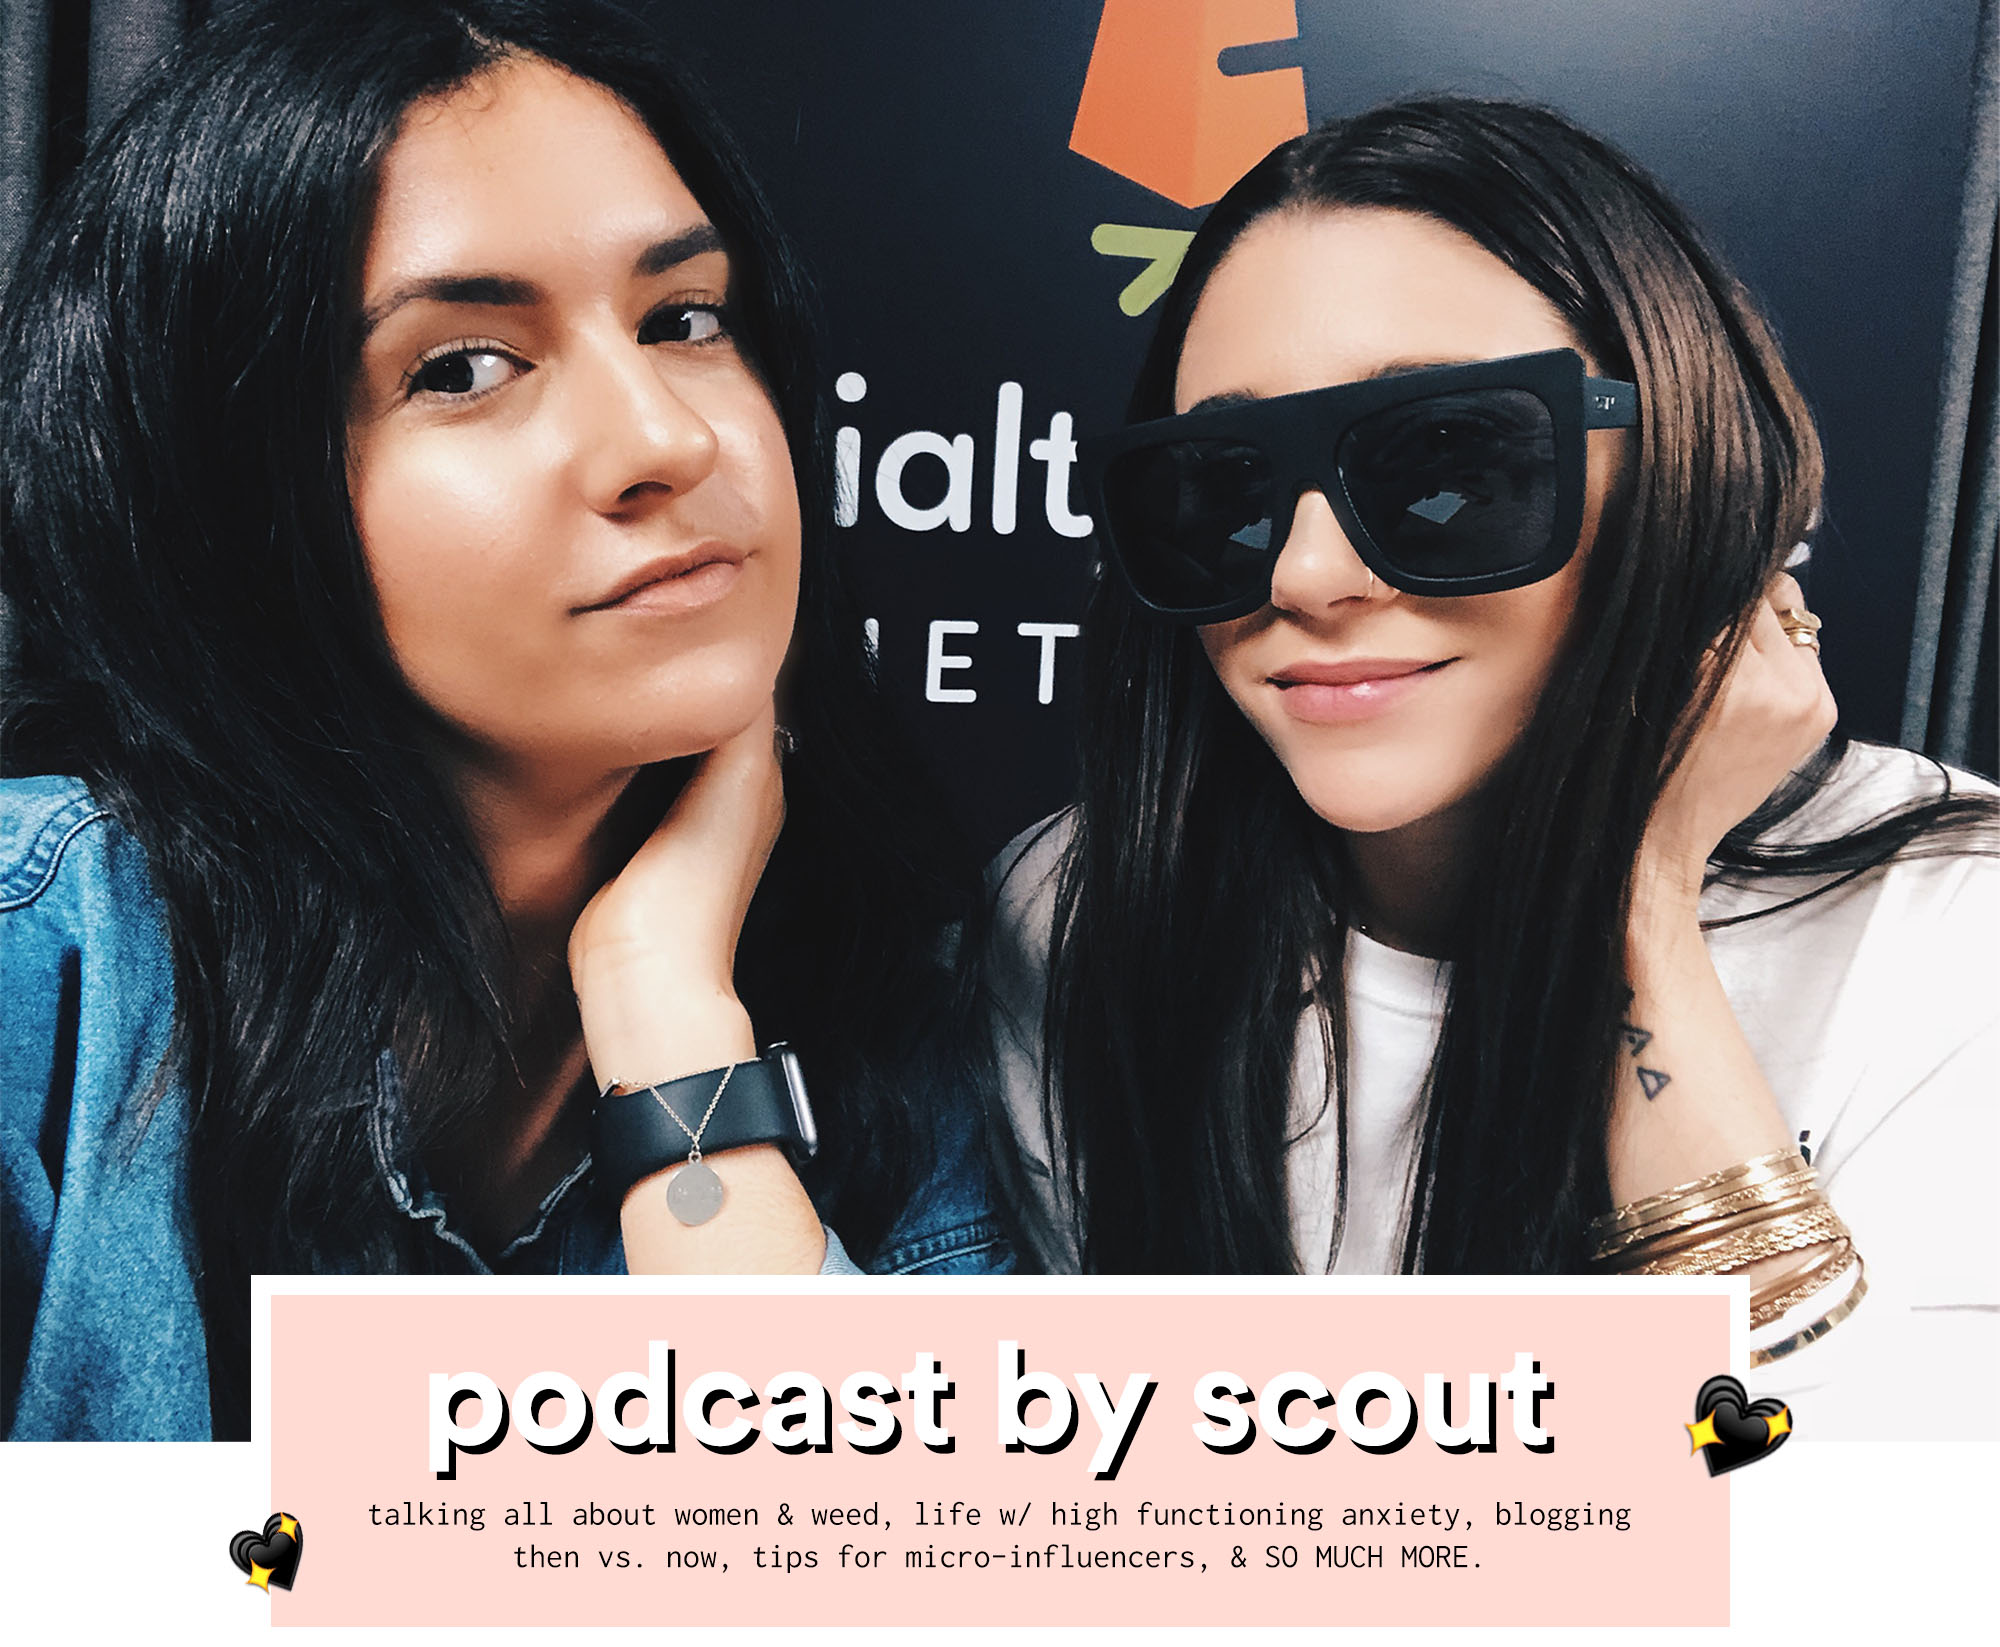 Podcast by Scout: Talking Cannabis, Blogging, & Why Micro-influencers are Where It's At